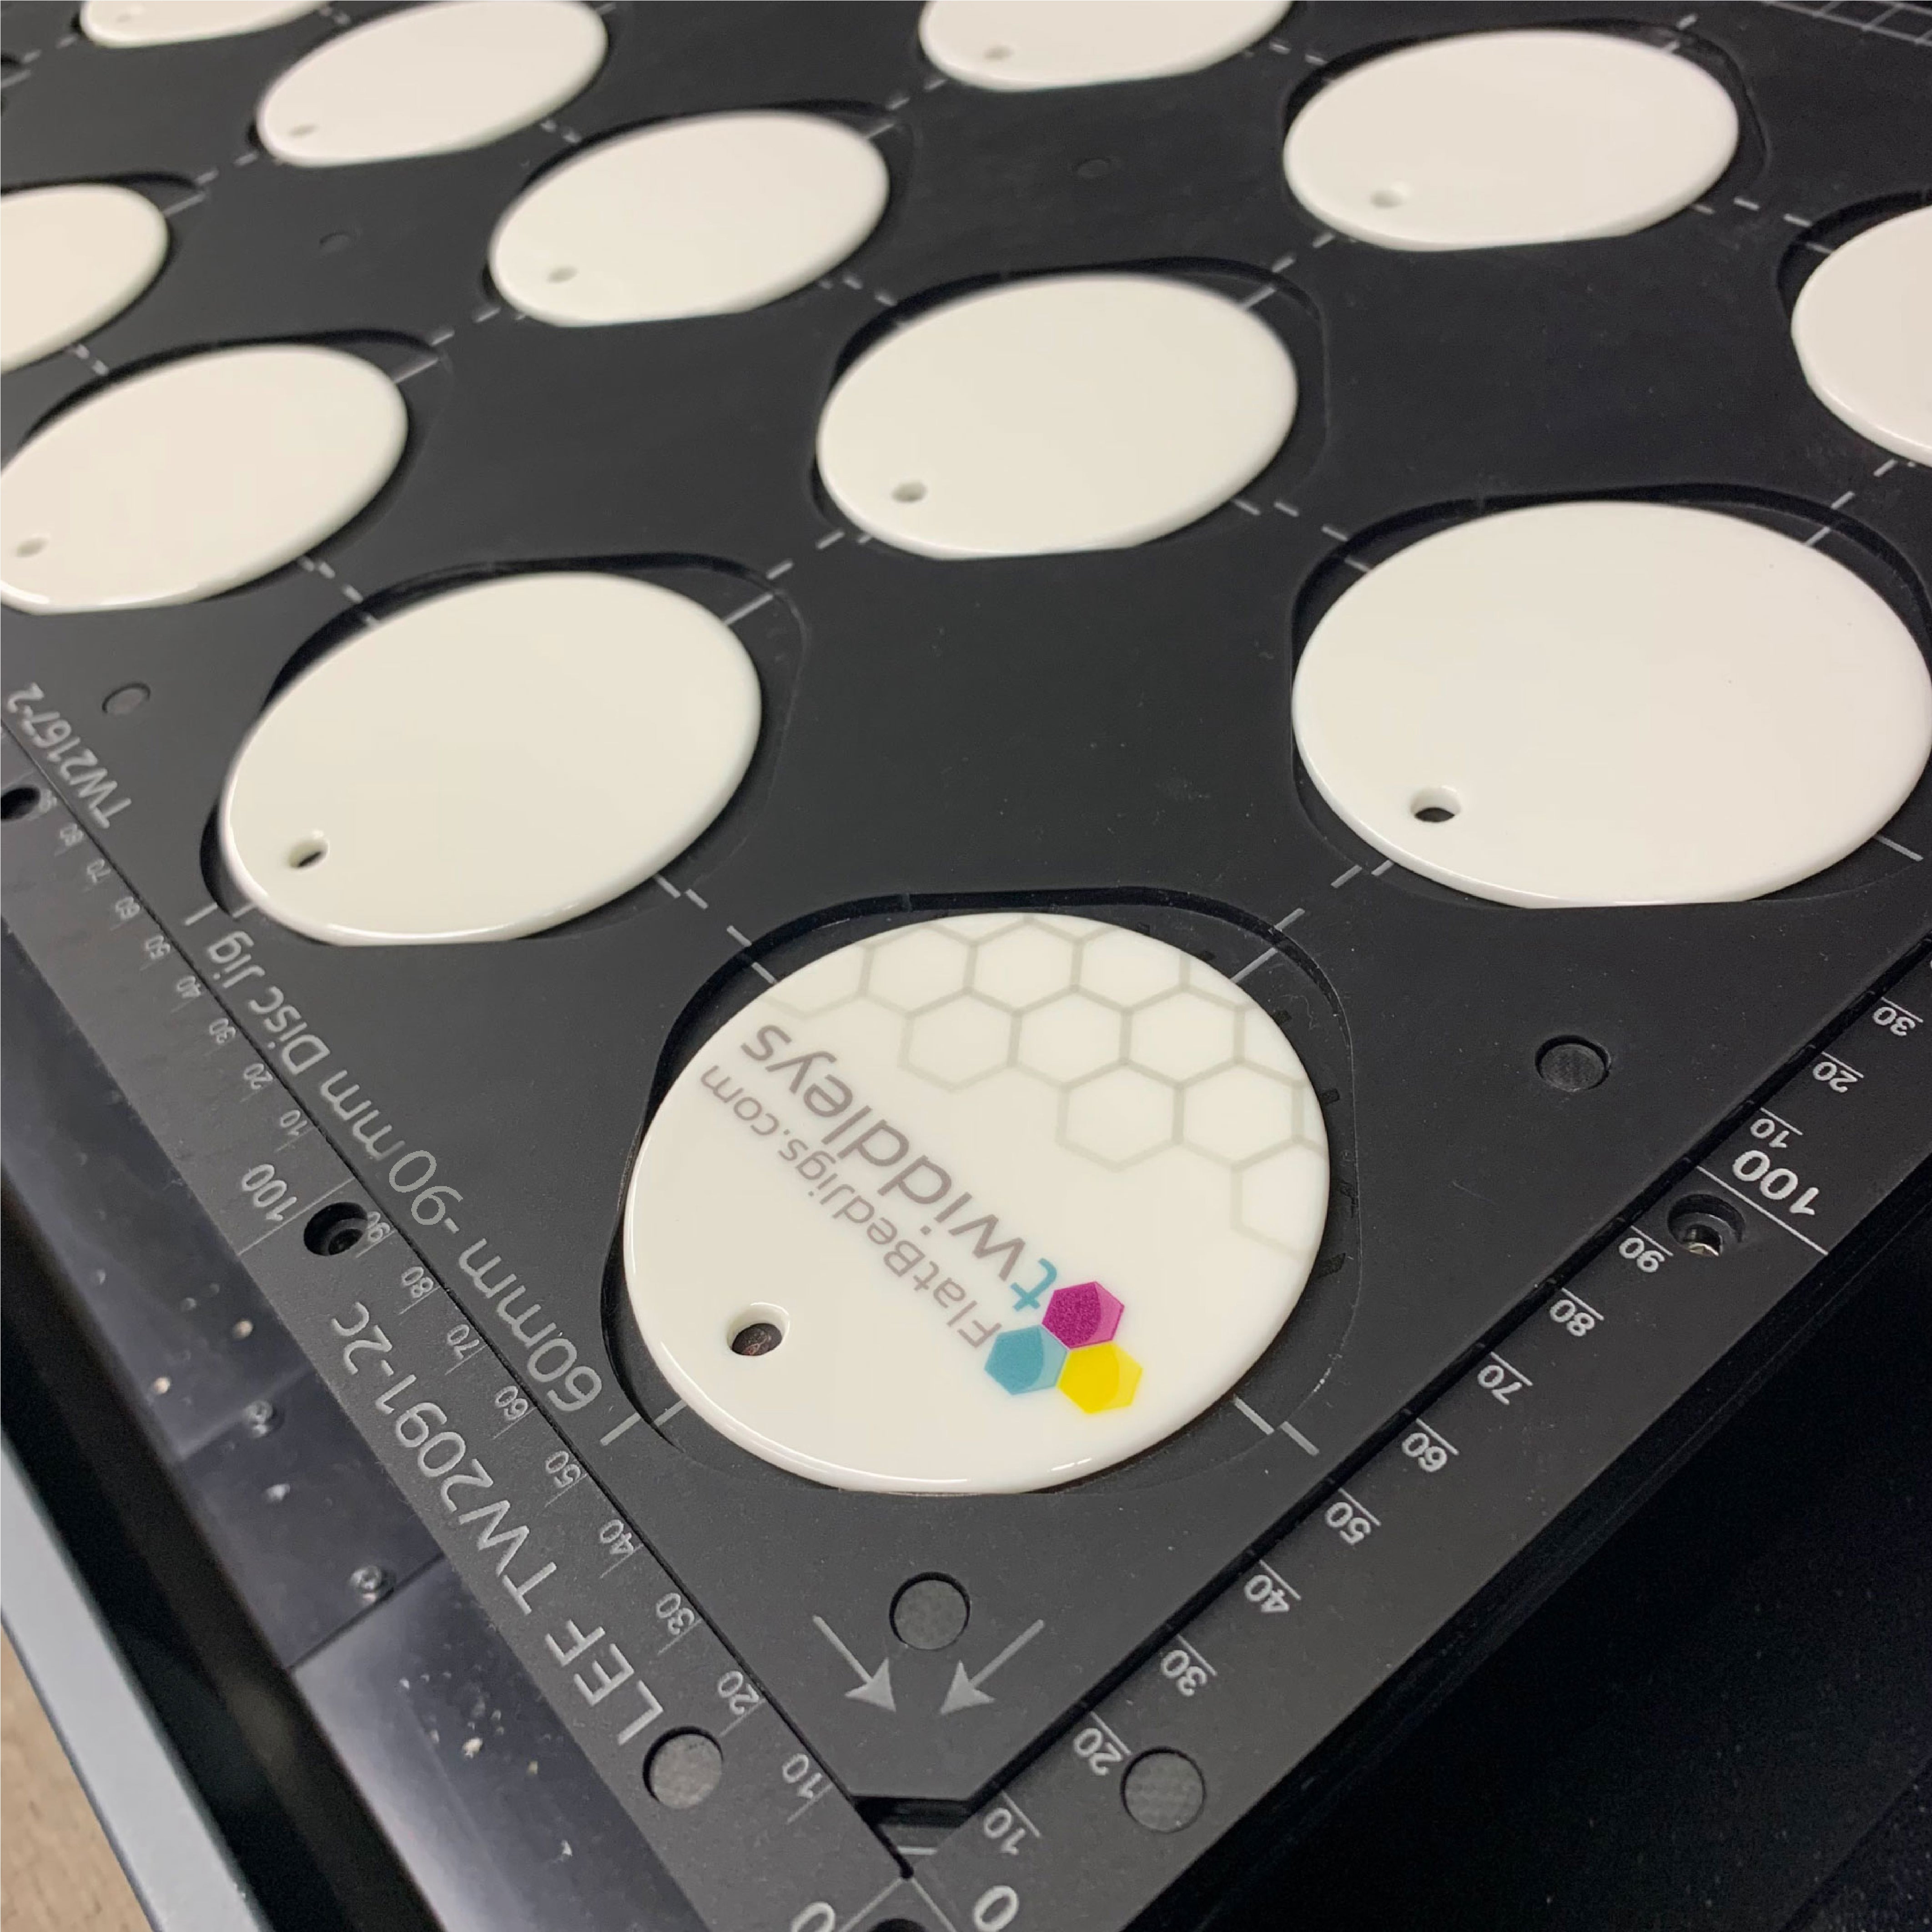 Ceramic Christmas Bauble Printing Jig for Roland LEF 300 Flatbed Printer Series: 60mm - 90mm Circular Discs (12 Spaces)